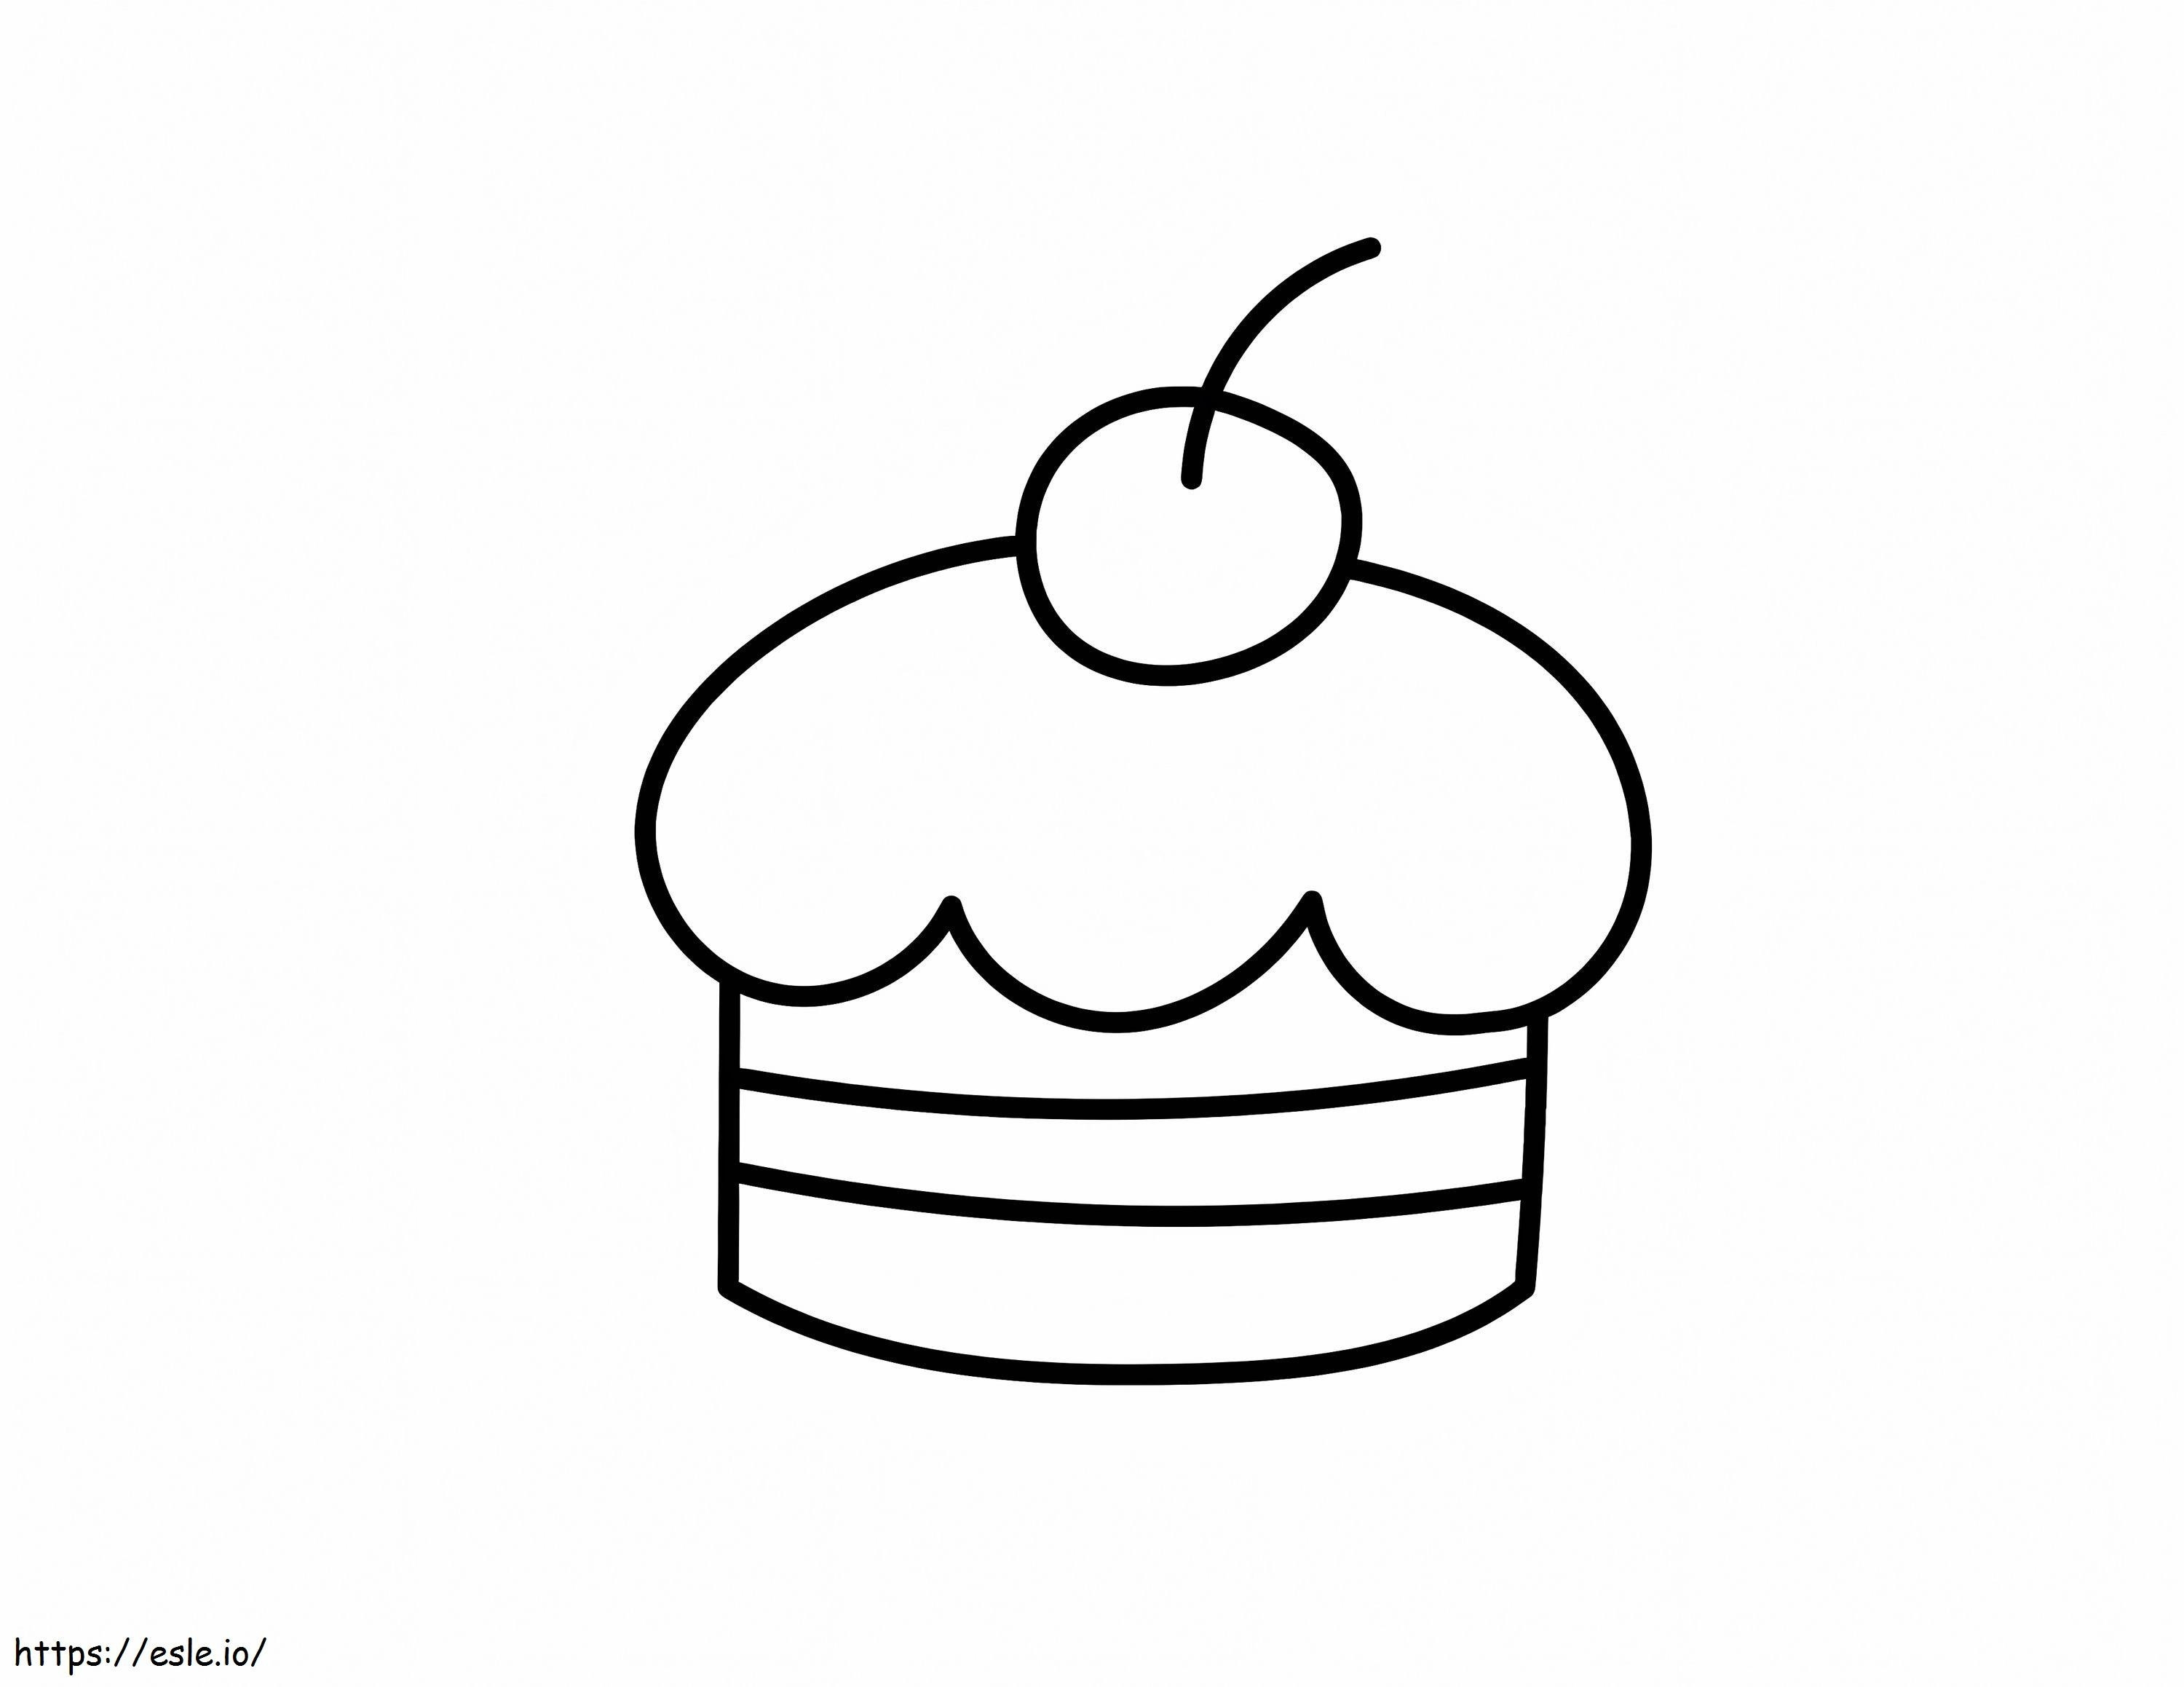 Easy Cake coloring page